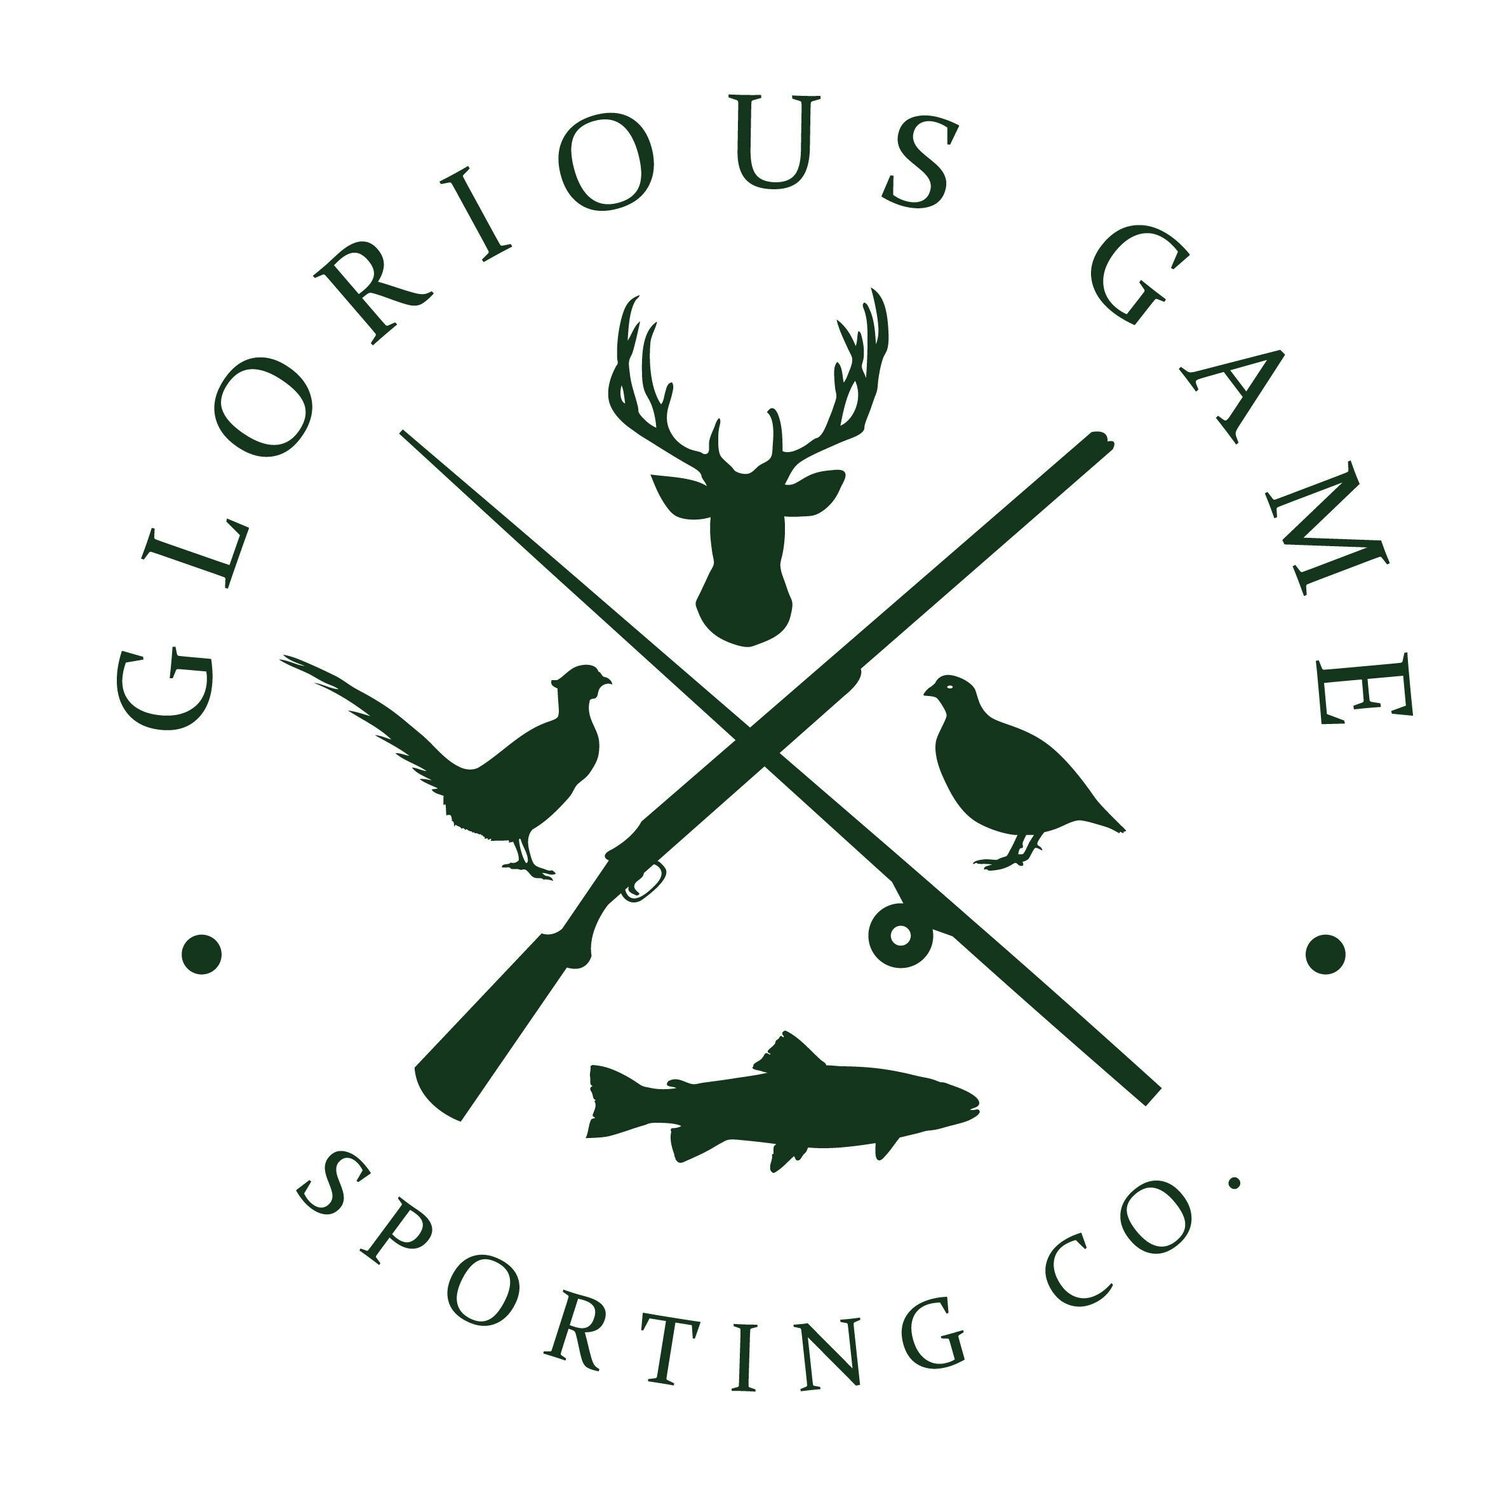 Glorious Game Sporting Co.